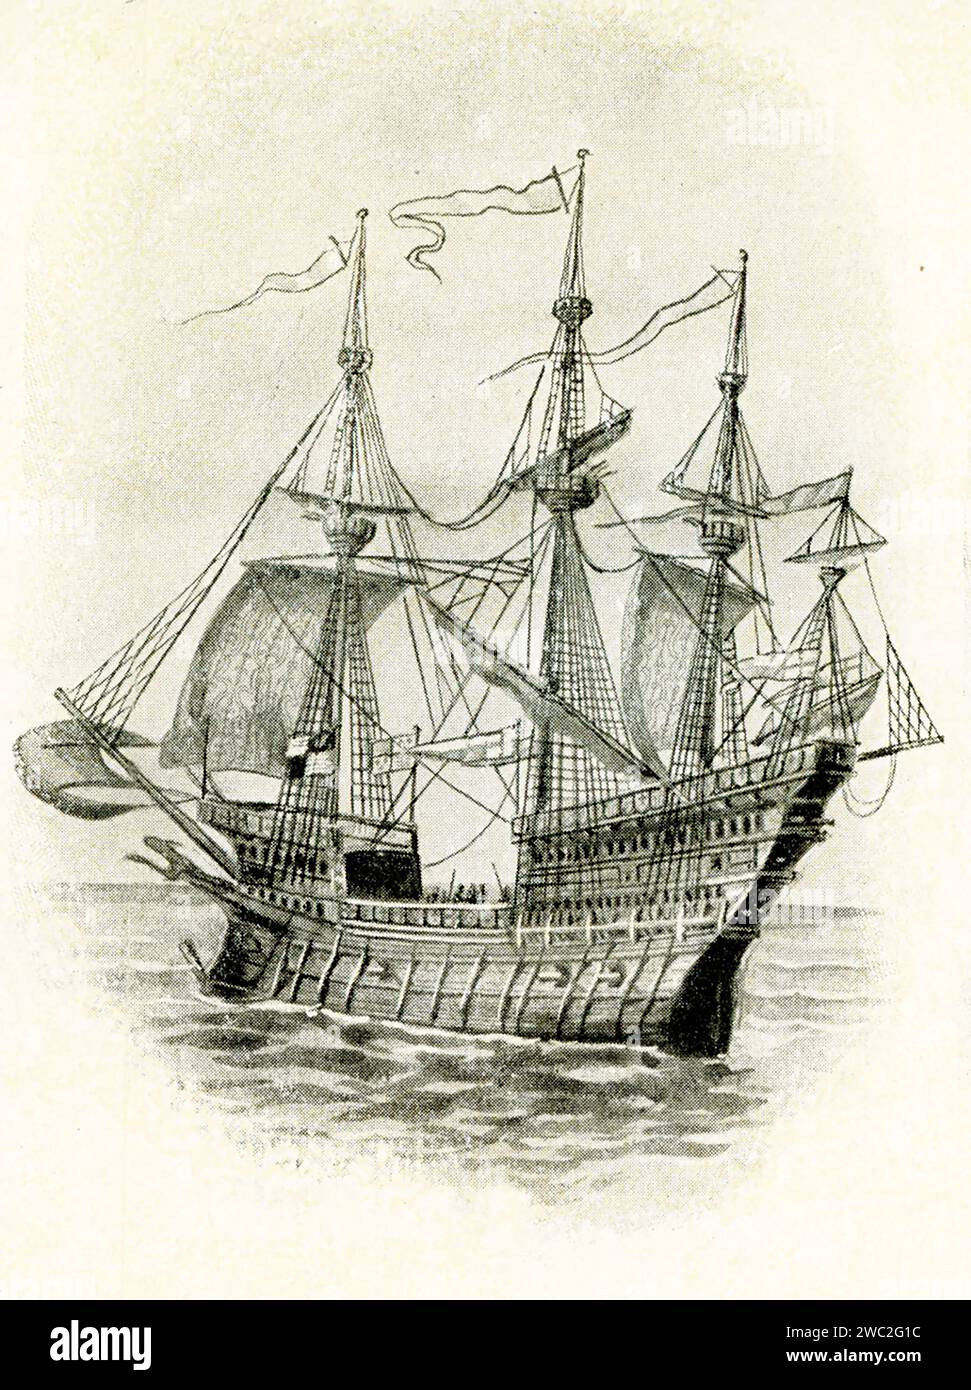 Dutch armed merchant ship at end of 16th century. This style is known as a fluyt—this type of sailing vessel was originally designed by shipwrights of Hoorn as a cargo vessel. Stock Photo